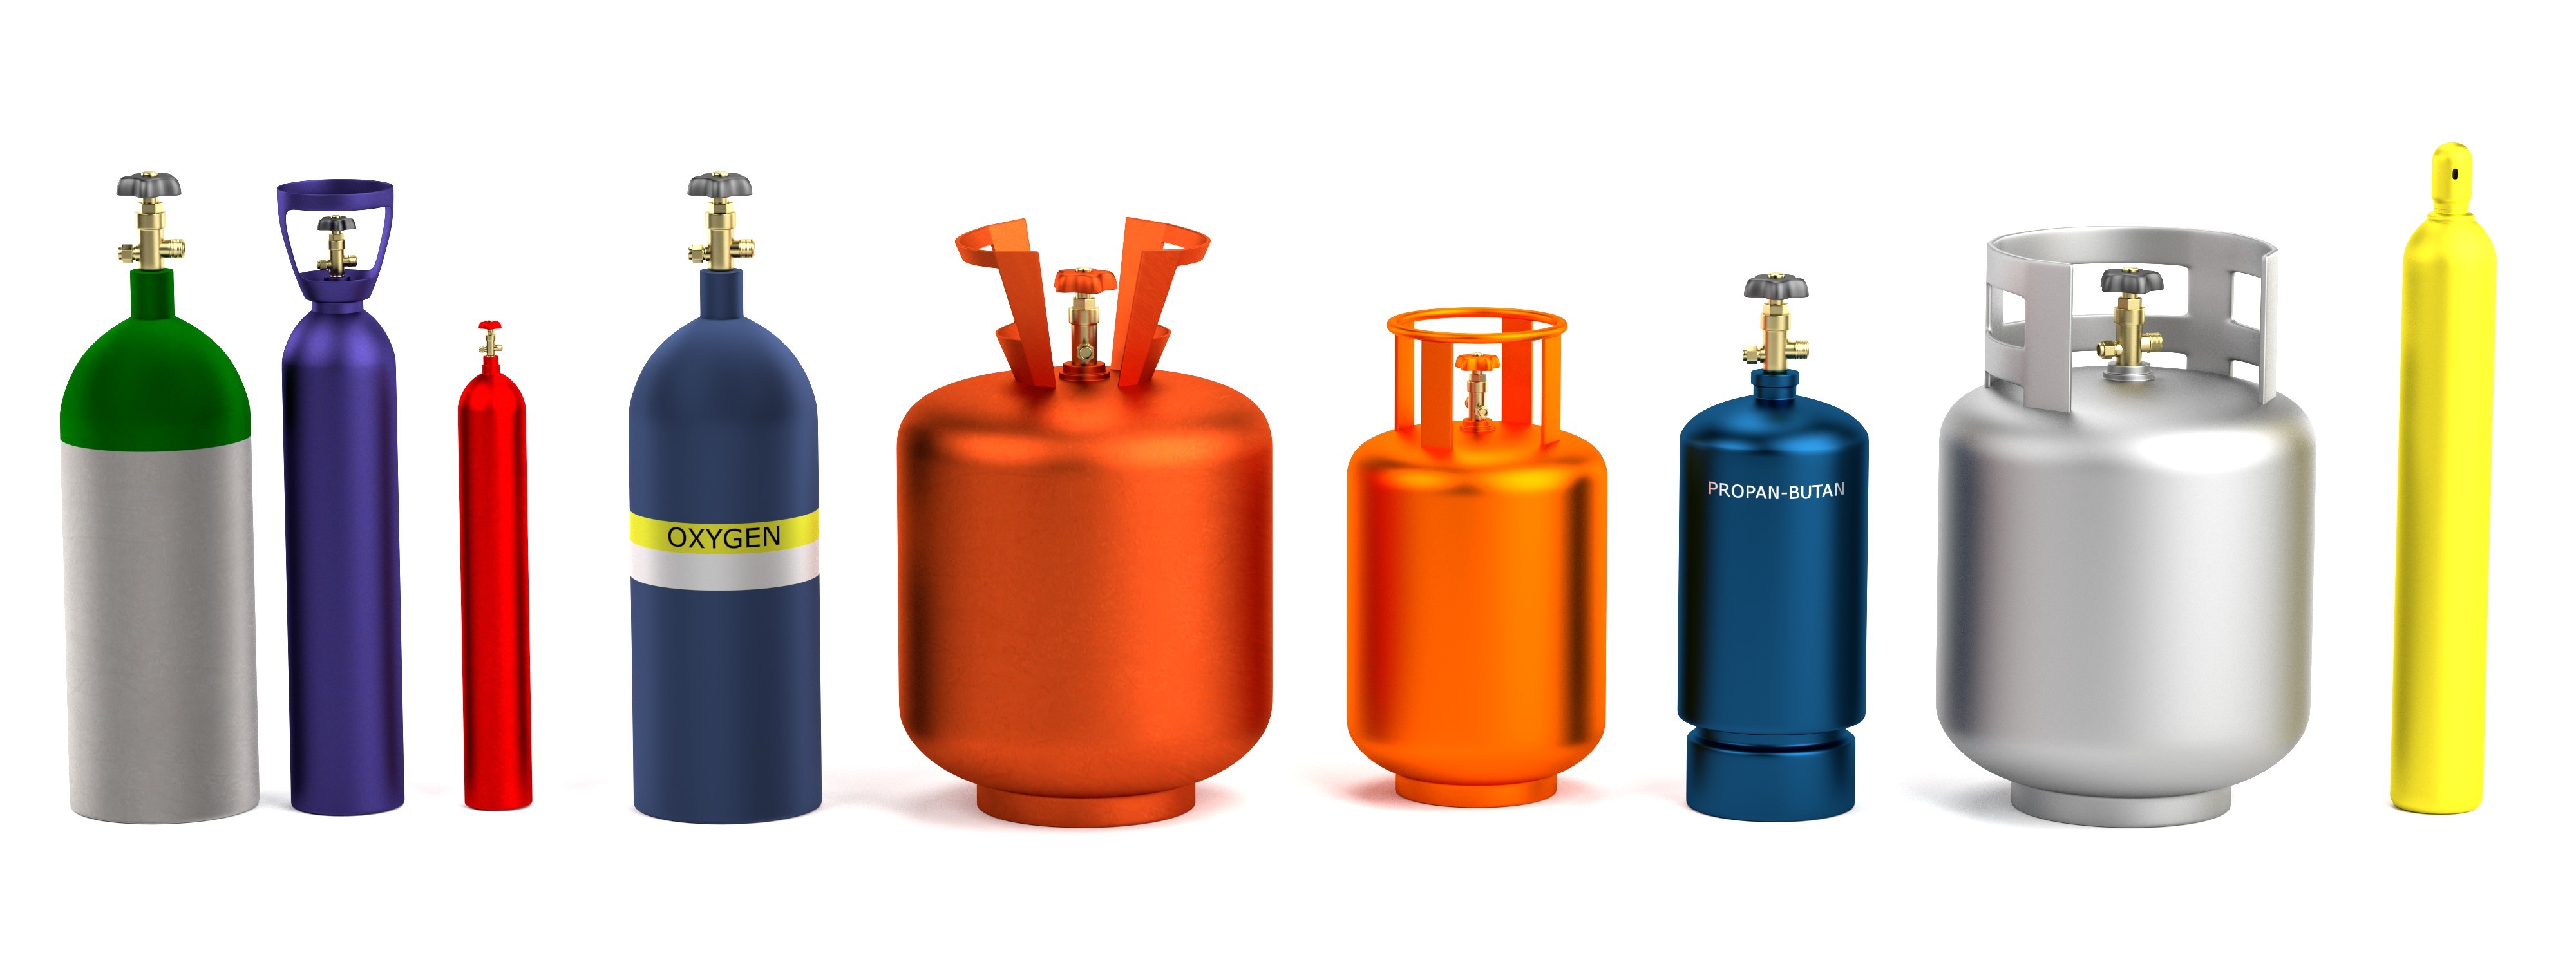 Which household items are flammable?